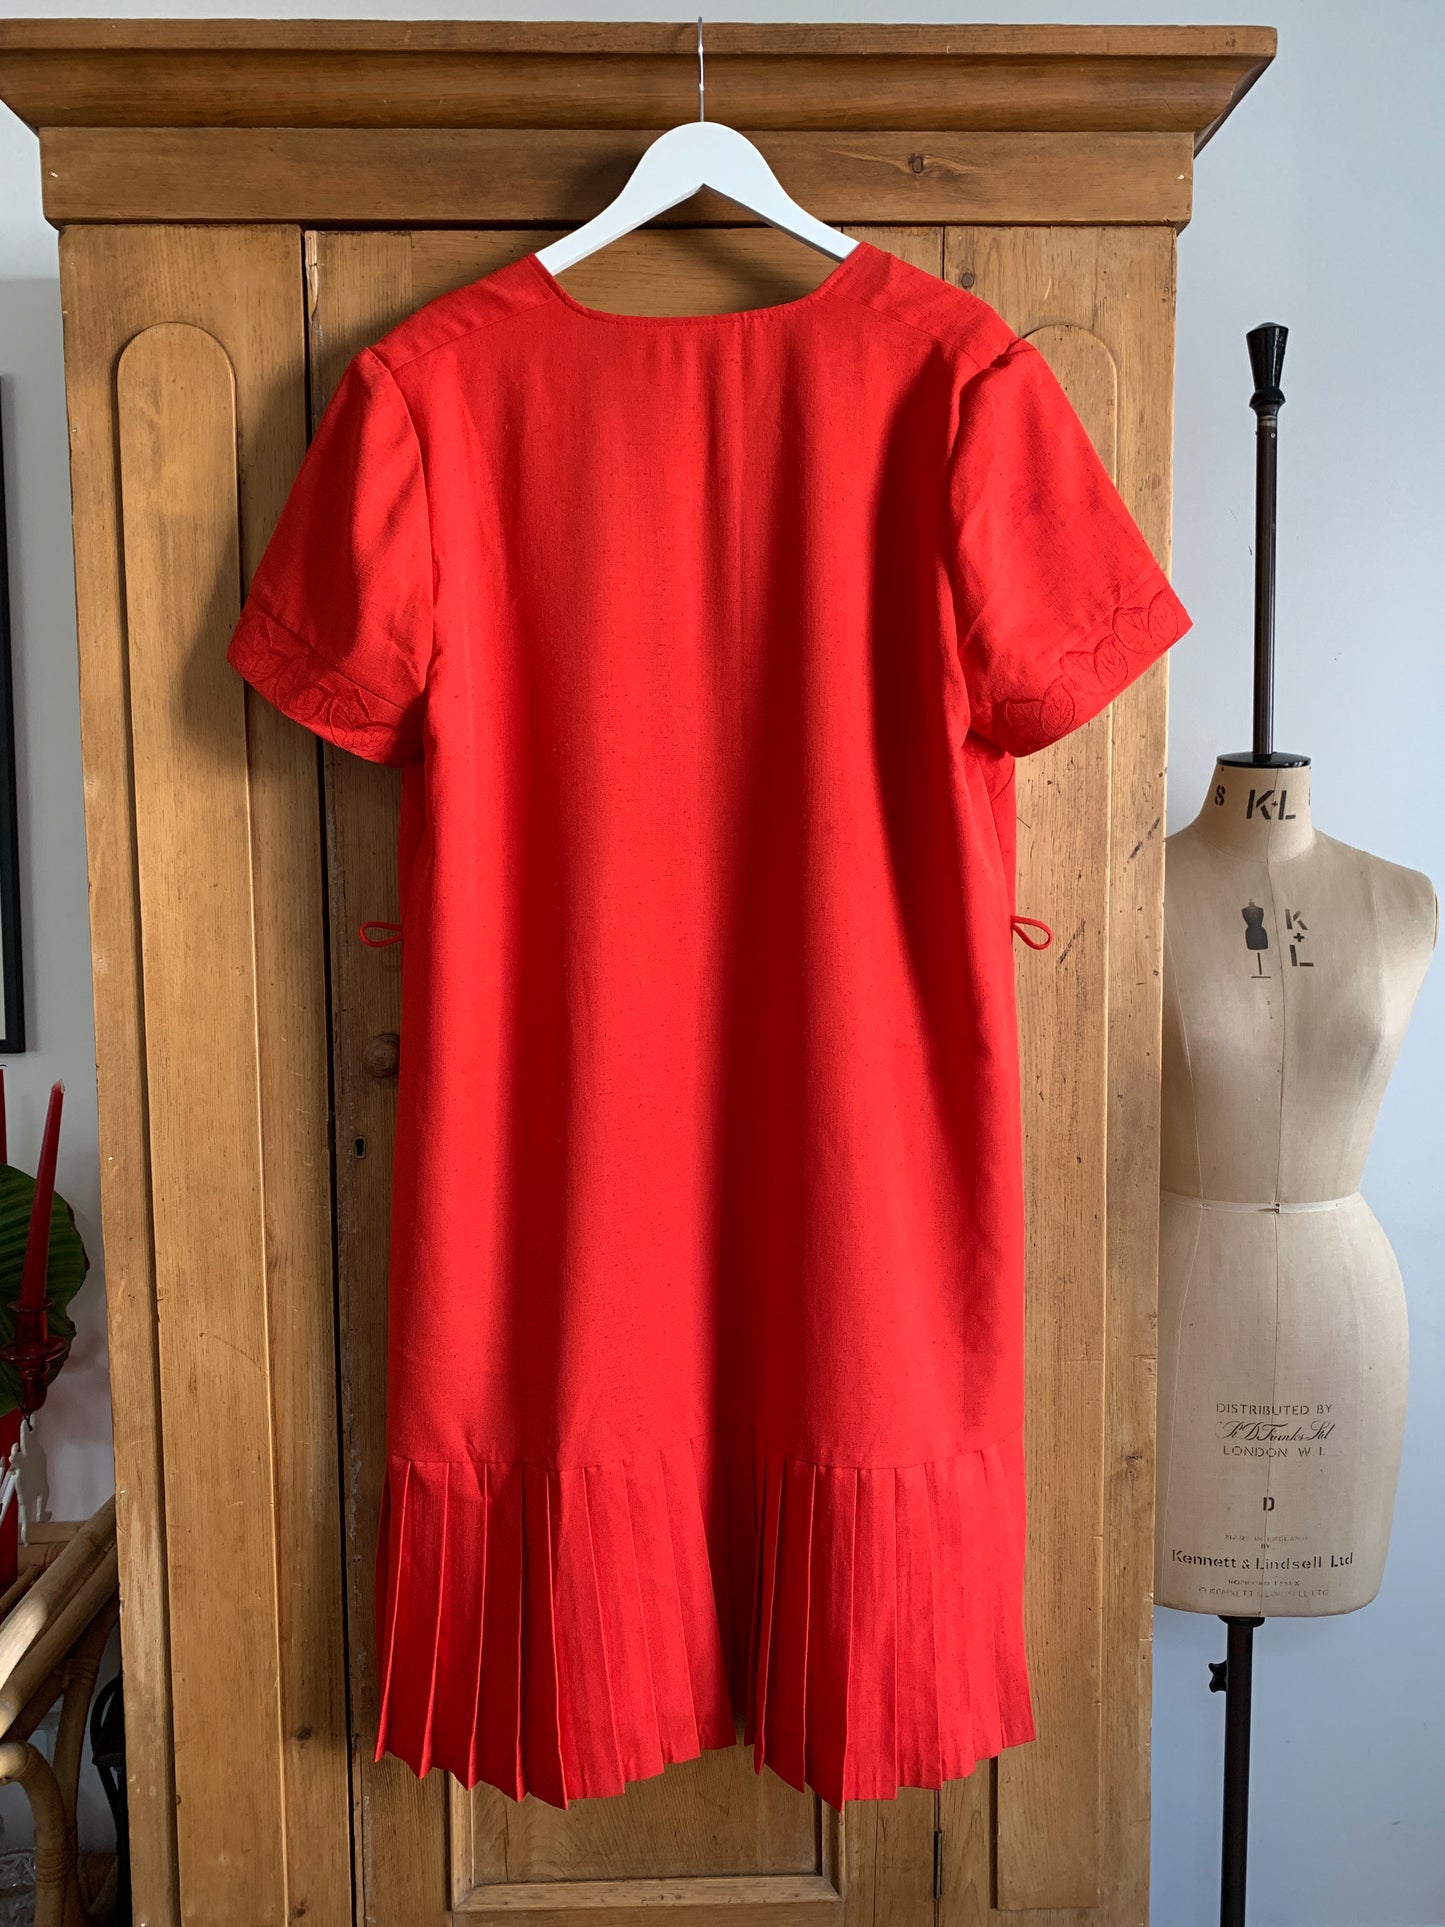 2 The French Finds Collection: Christian Michel 80’s French Vintage Red Loose Drop Waist Red Short Dress with Pleats